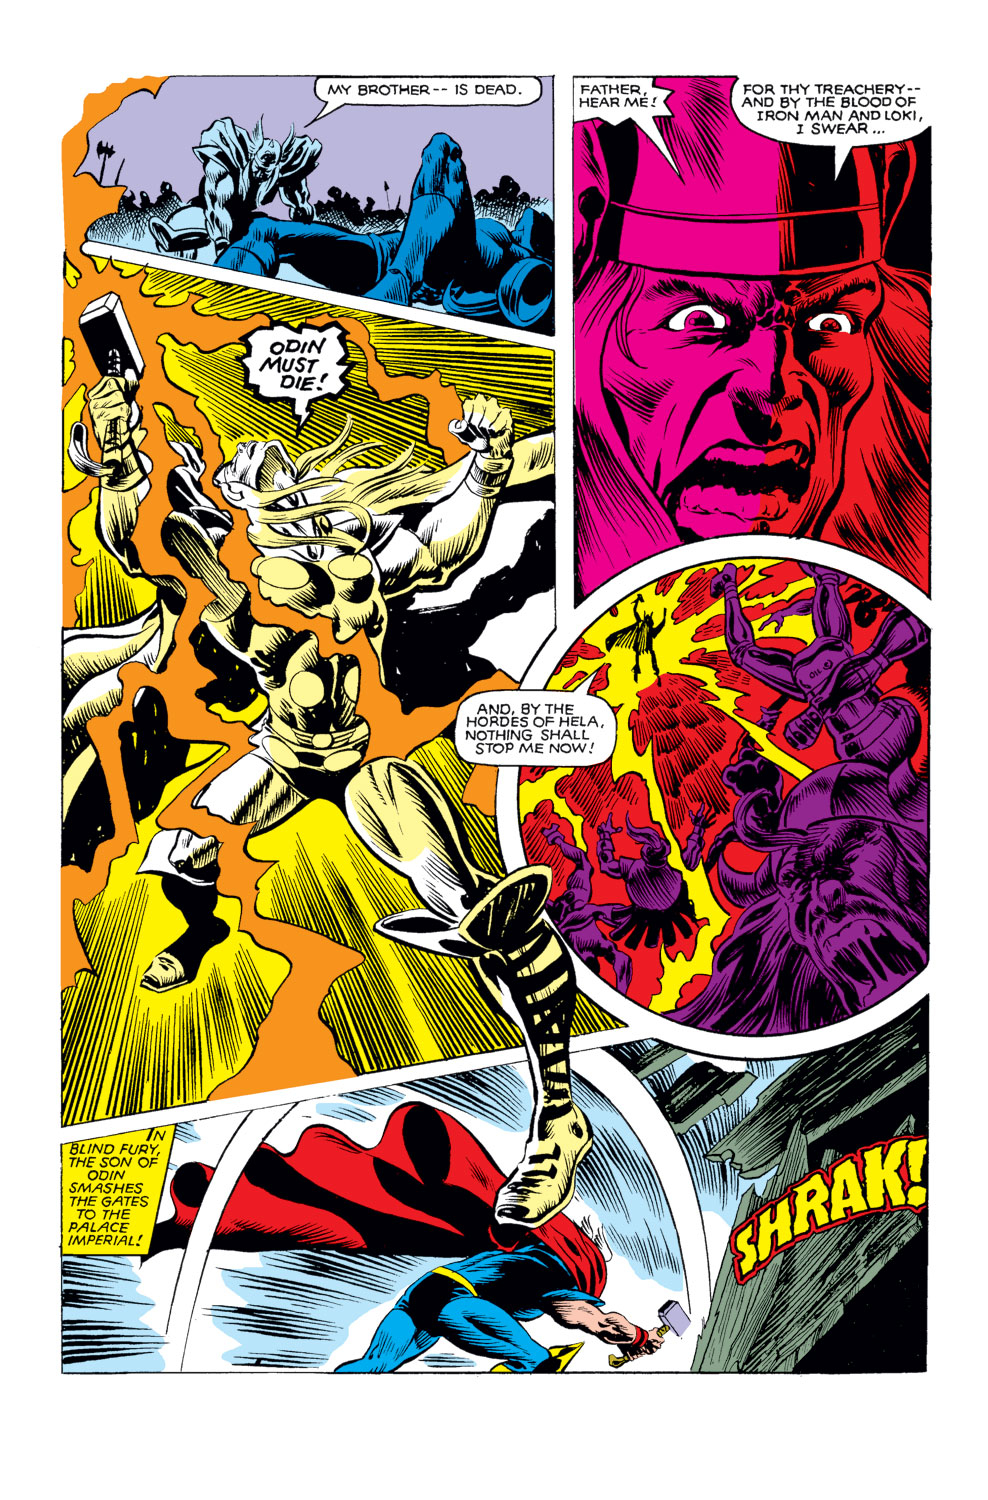 What If? (1977) Issue #25 - Thor and the Avengers battled the gods #25 - English 28